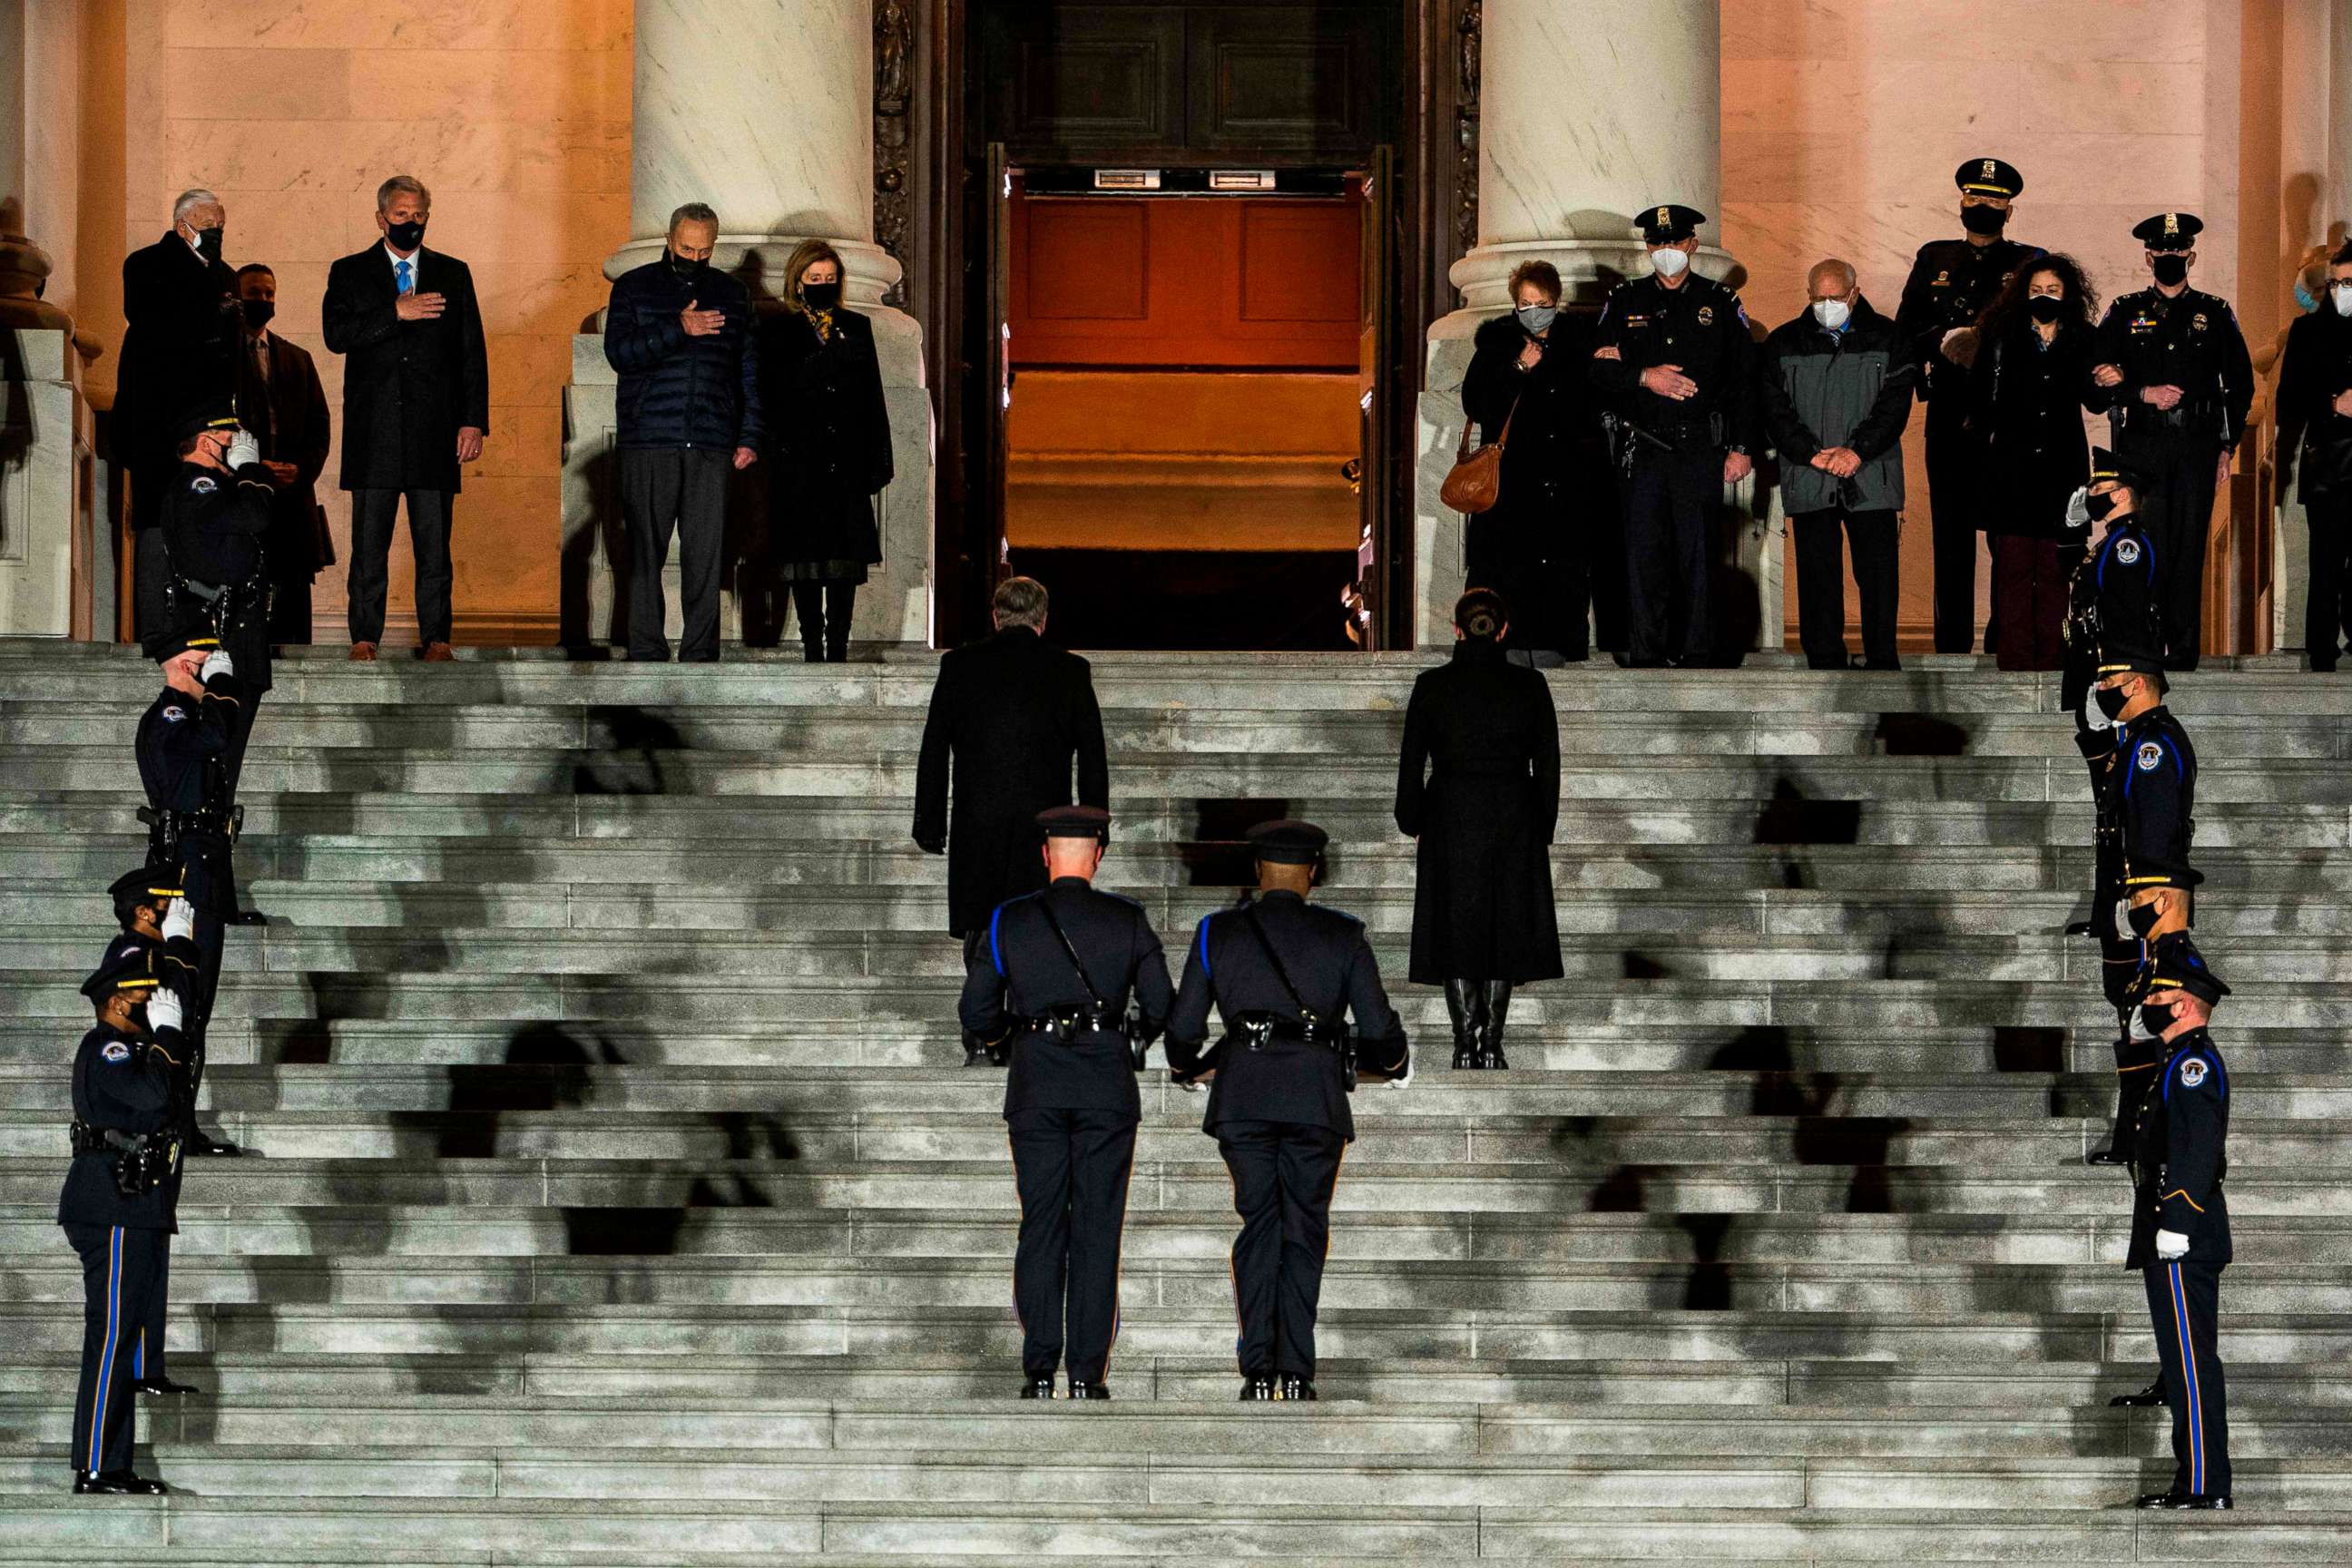 PHOTO: Honor guards carry an urn with the cremated remains of late U.S. Capitol Police officer Brian Sicknick, who died while protecting the Capitol during the Jan. 6 attack, up the steps of the Capitol to lie in honor in the Rotunda, Feb. 2, 2021.